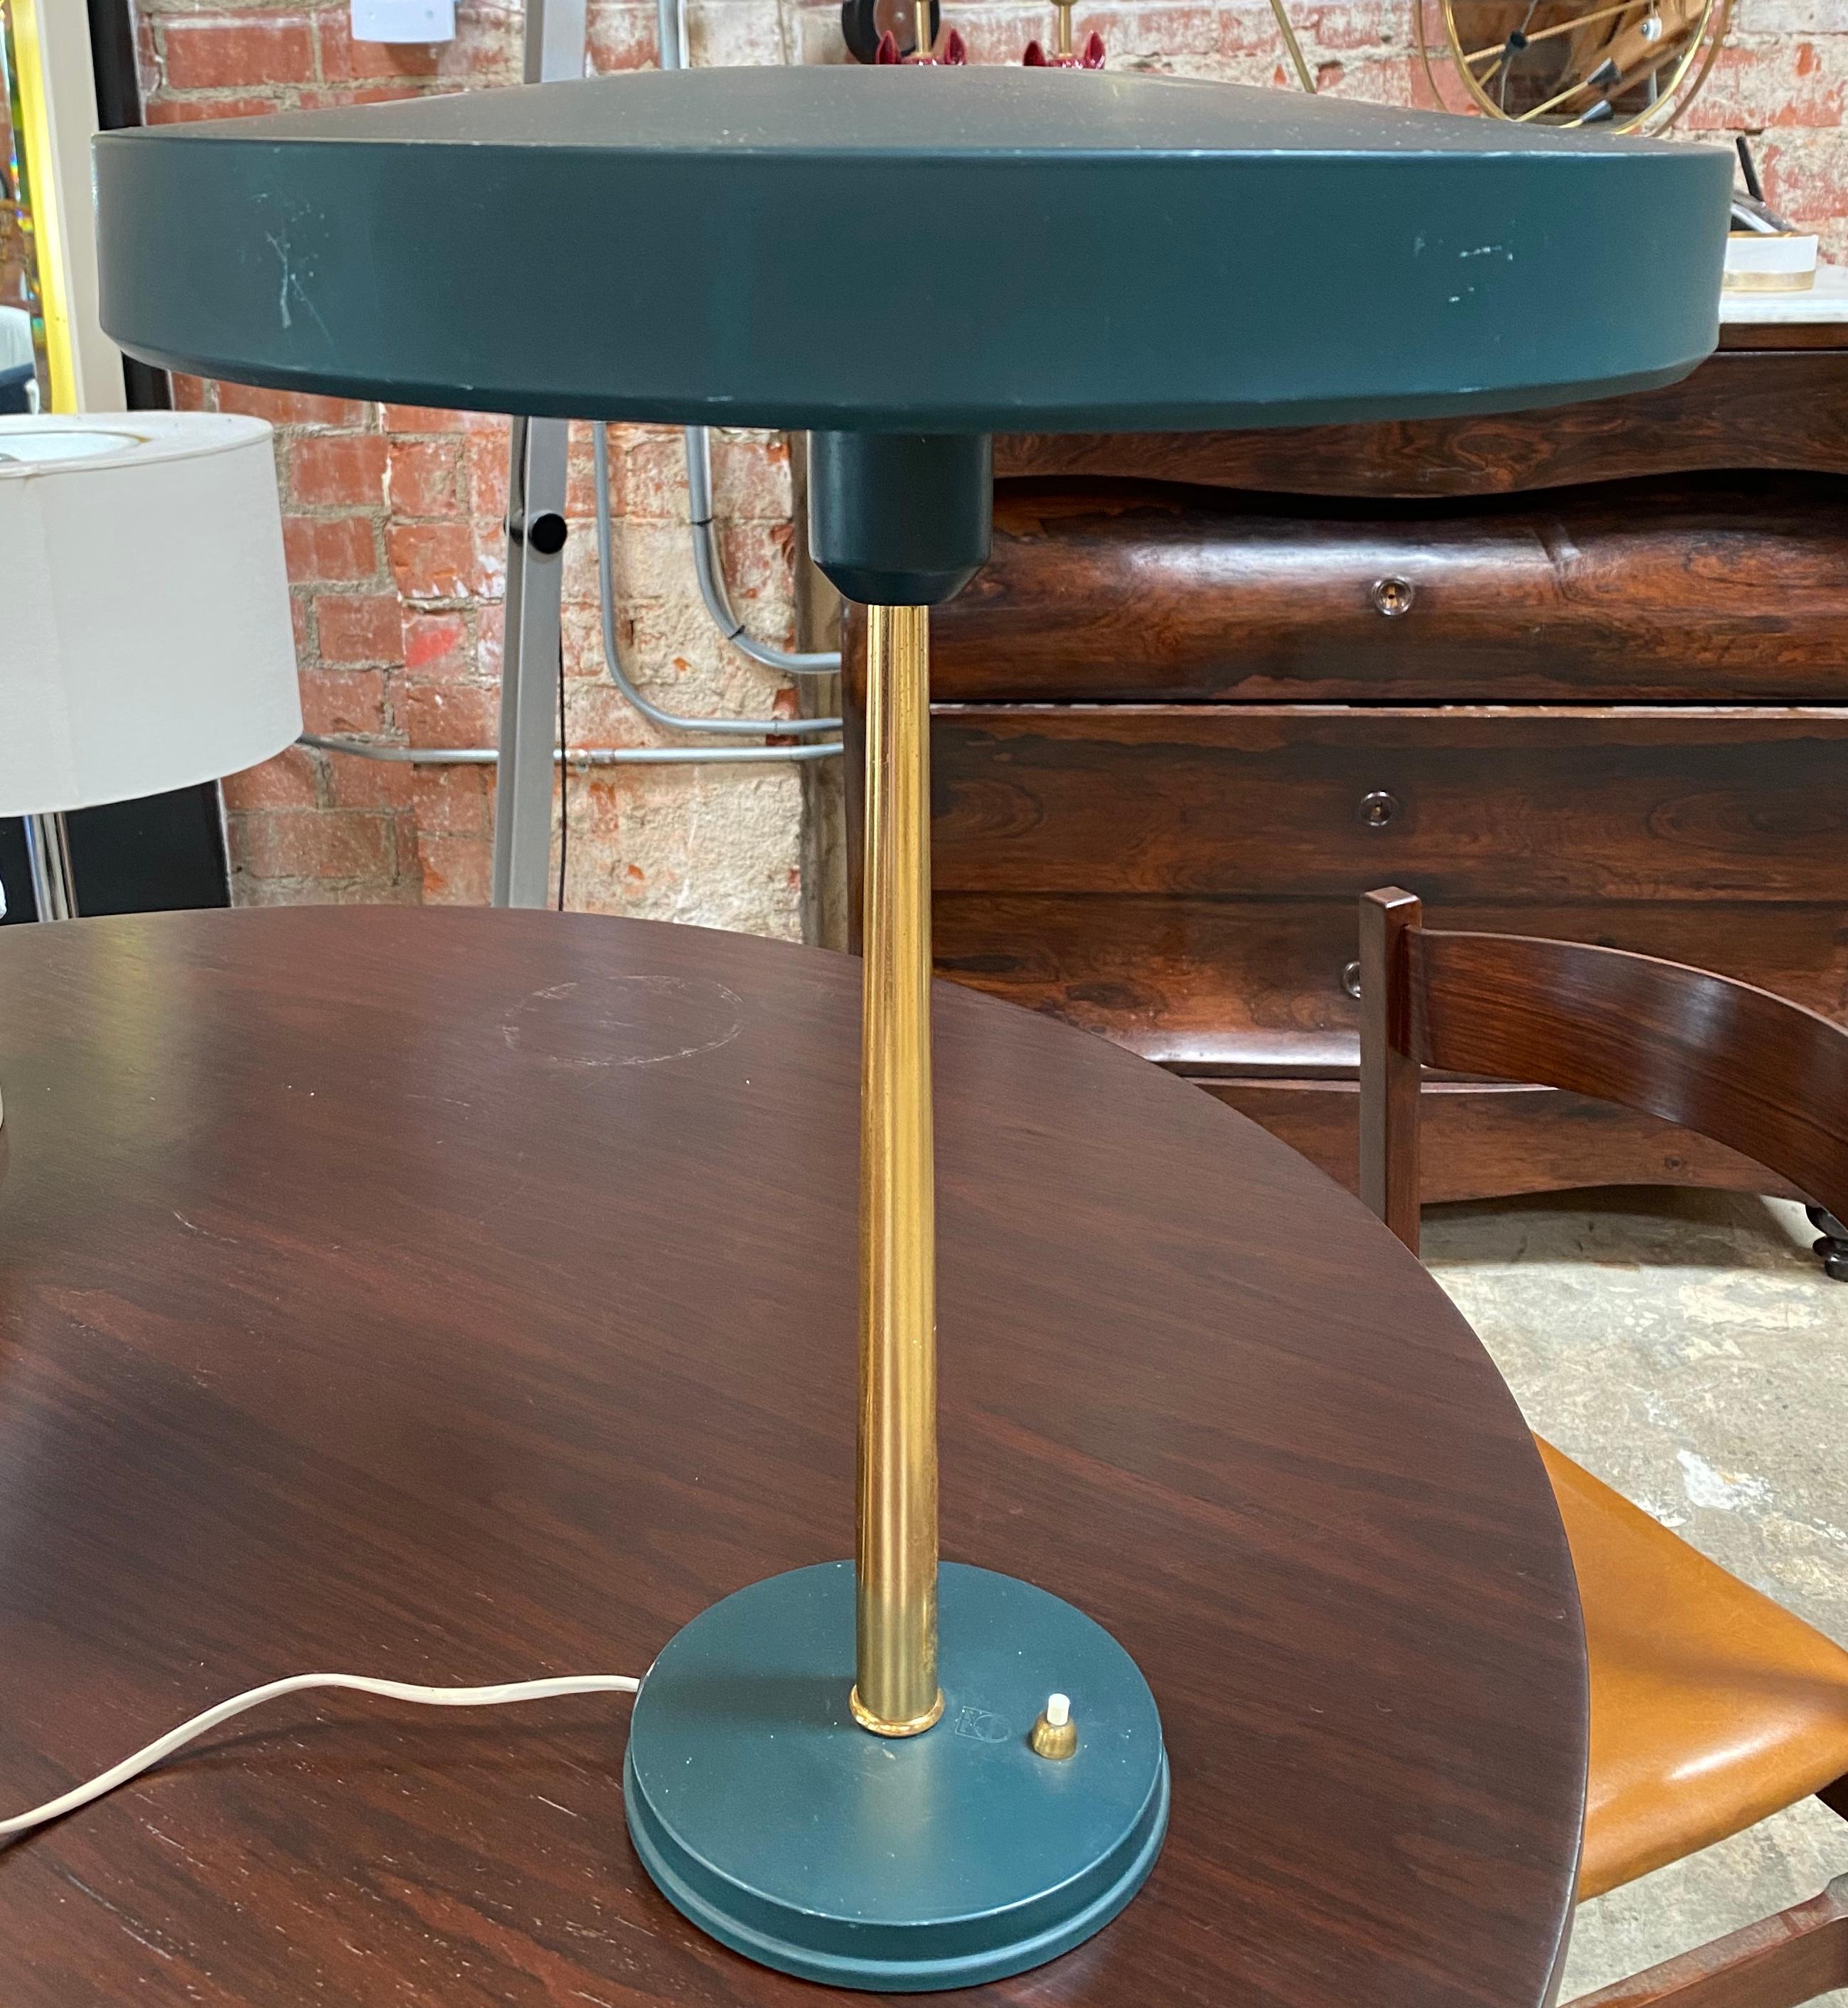 Model Timor desk lamp was designed by Louis Kalff for Philips and it is one of his most famous designs. The lamps features a conically shaped gold steel rod and dark grey painted aluminum base and round screen.